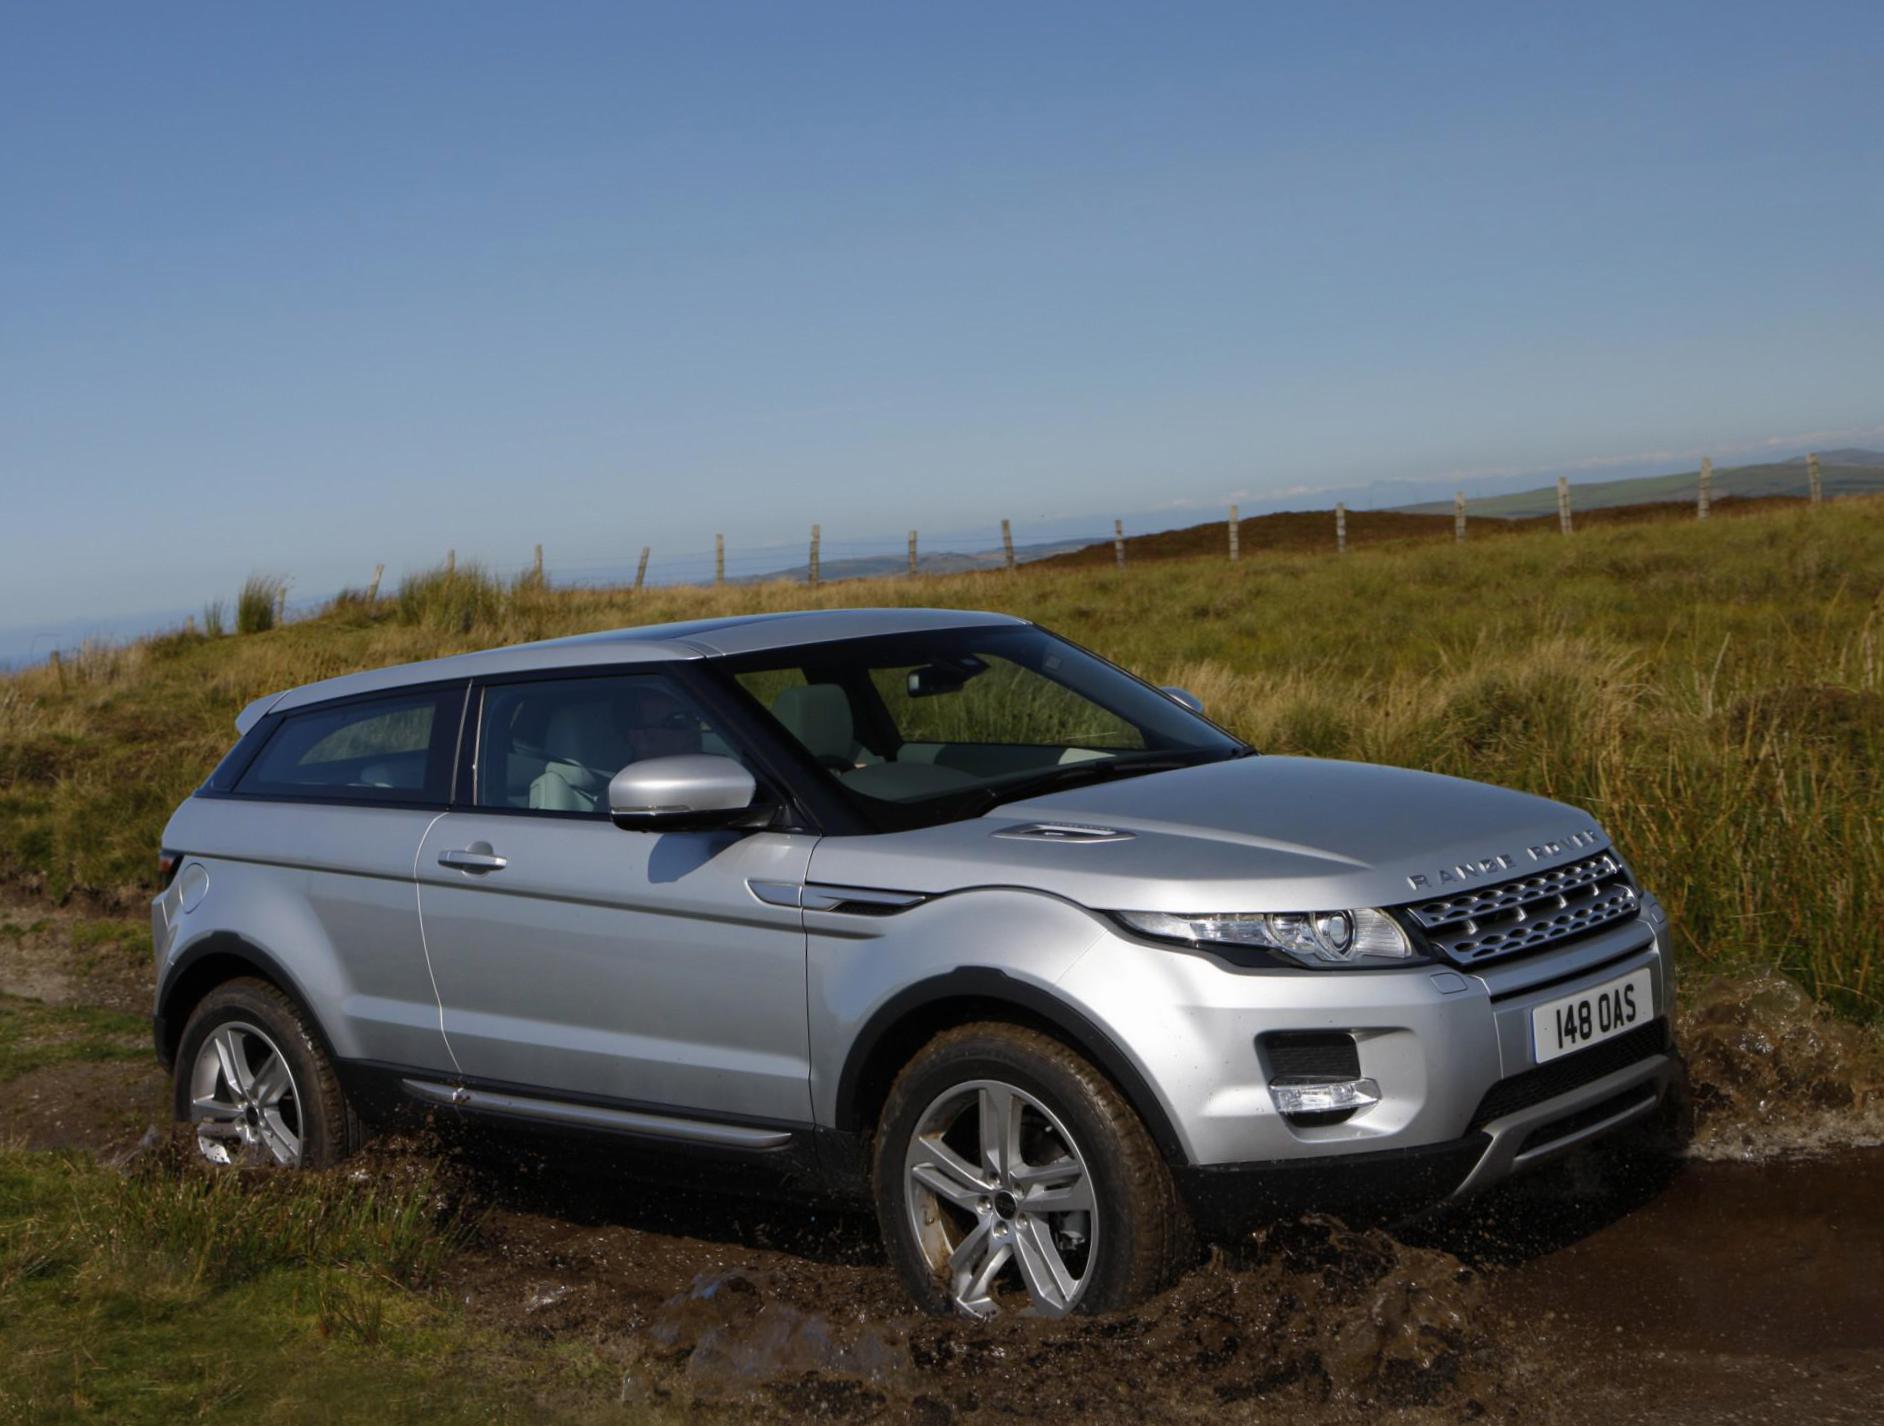 Land Rover Range Rover Evoque Specifications 2010